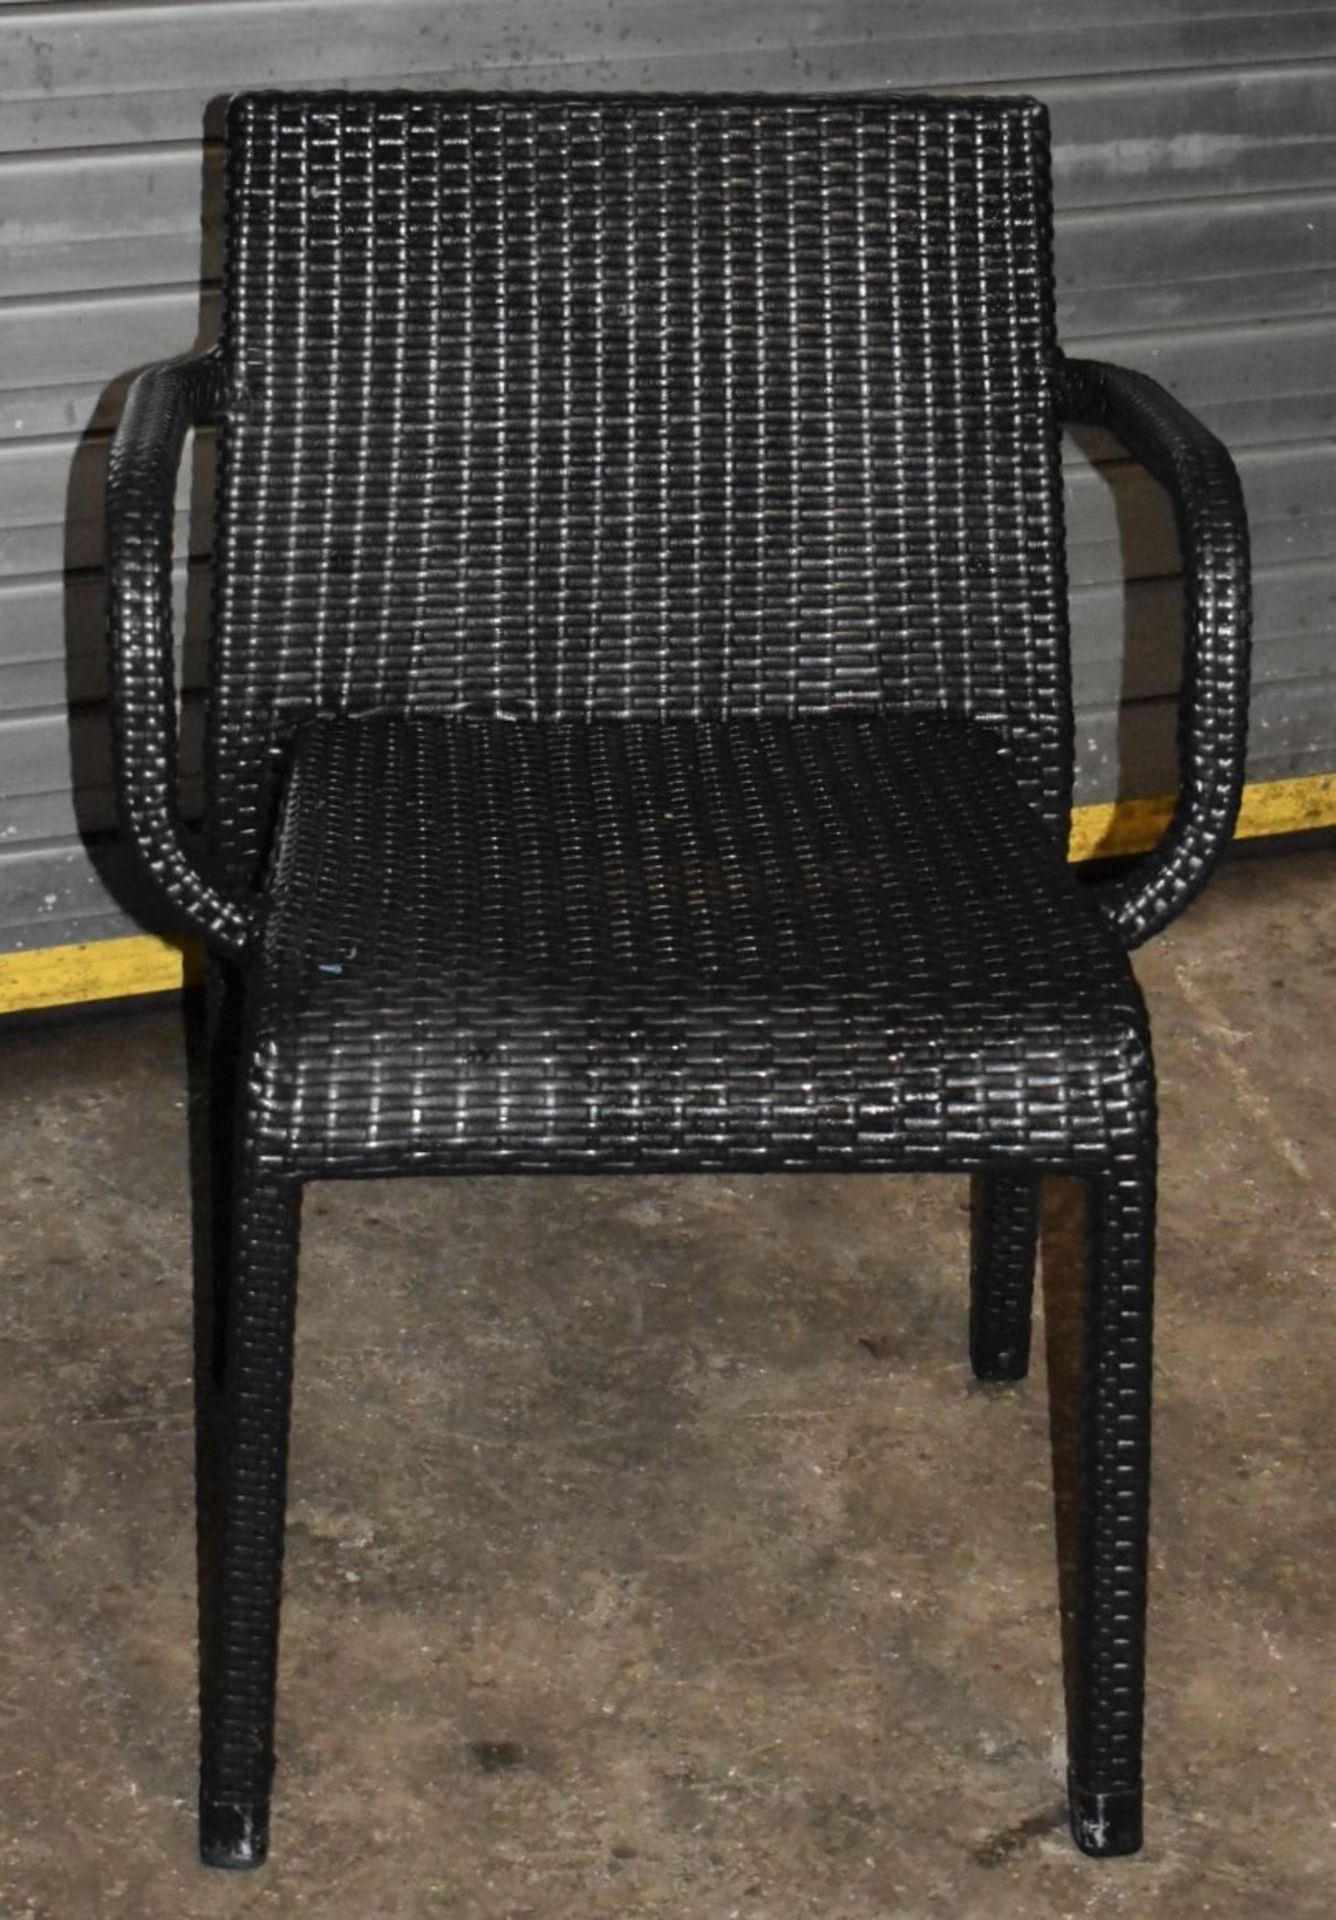 4 x Outdoor Stackable Rattan Chairs With Arm Rests - CL999 - Ref WH5 - Provided in Very Good - Image 2 of 9